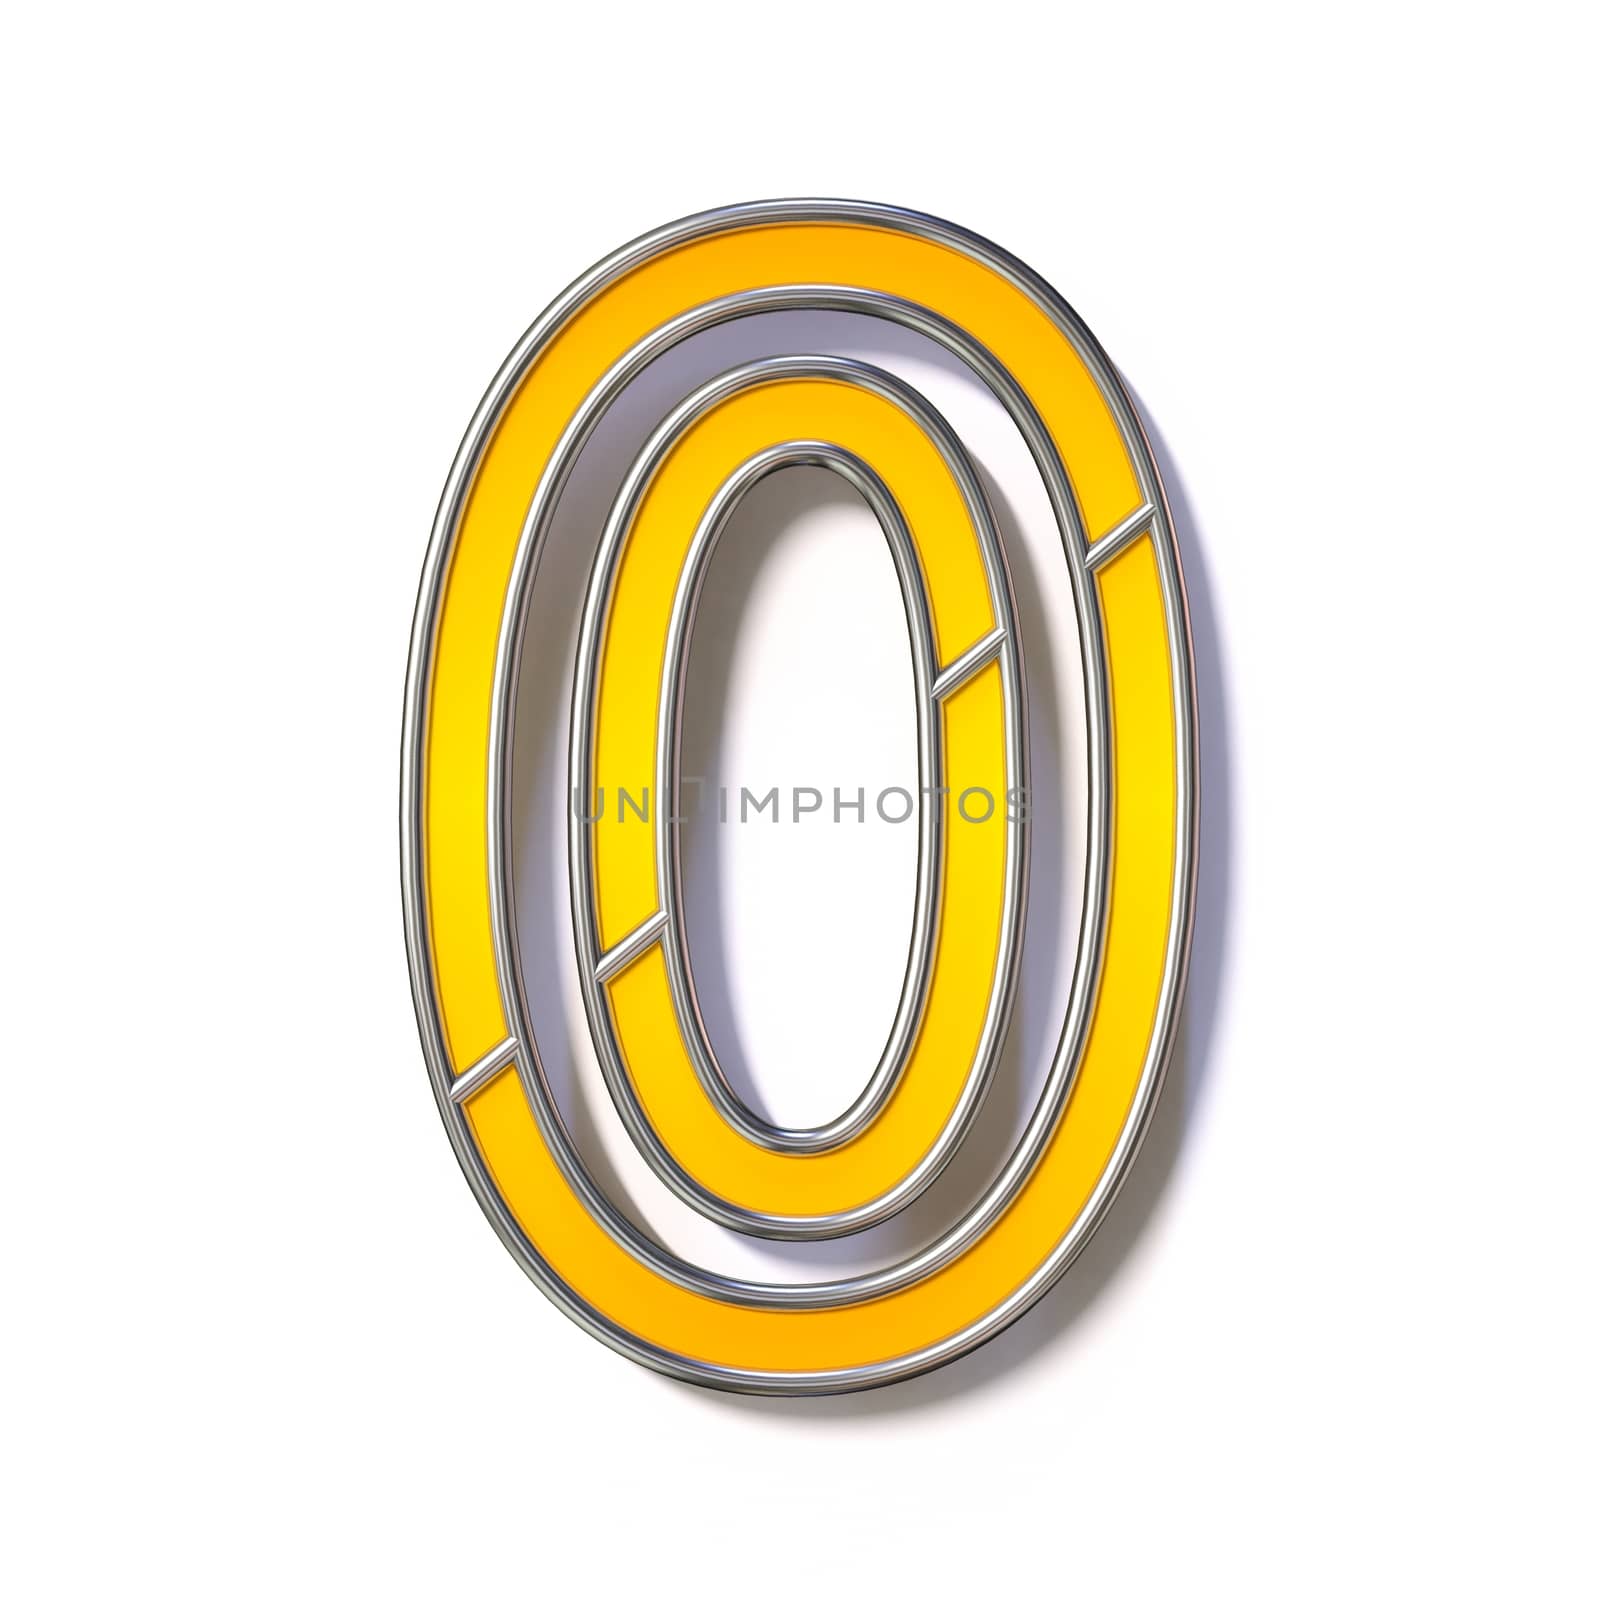 Orange metal wire font Number 0 ZERO 3D rendering illustration isolated on white background